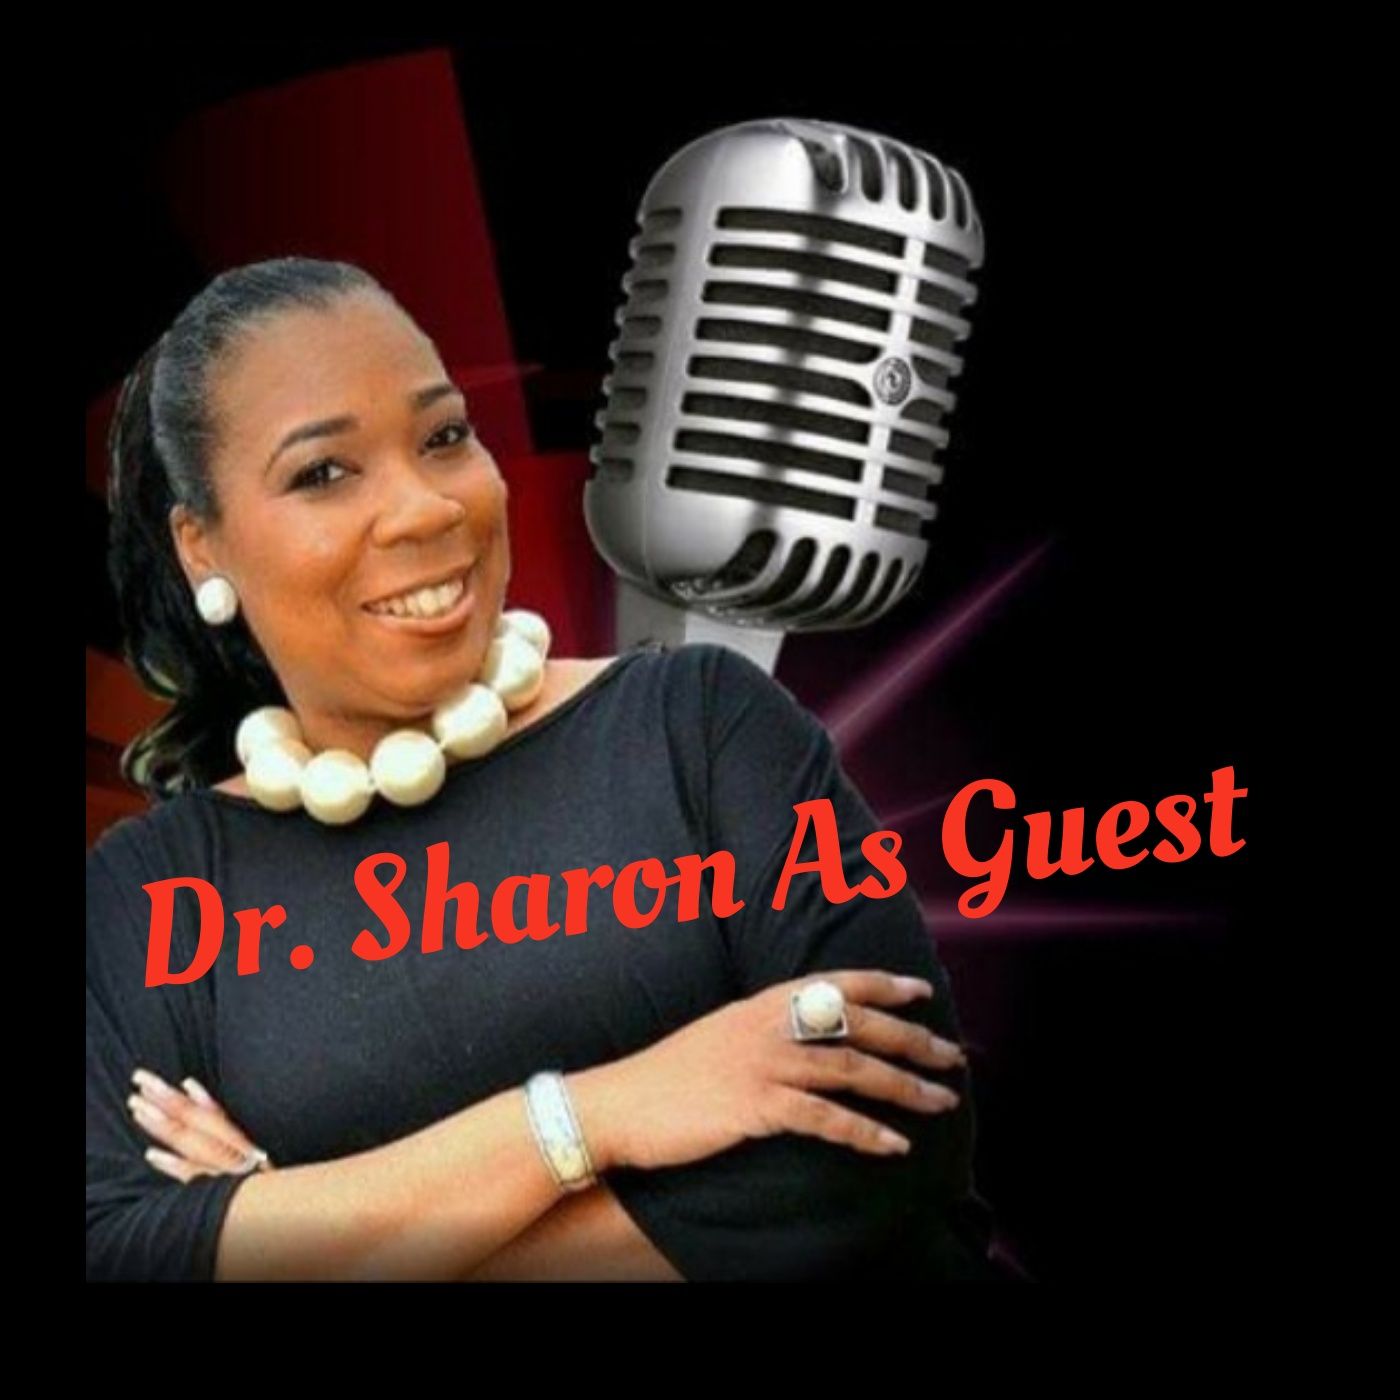 Dr. Sharon As Guest